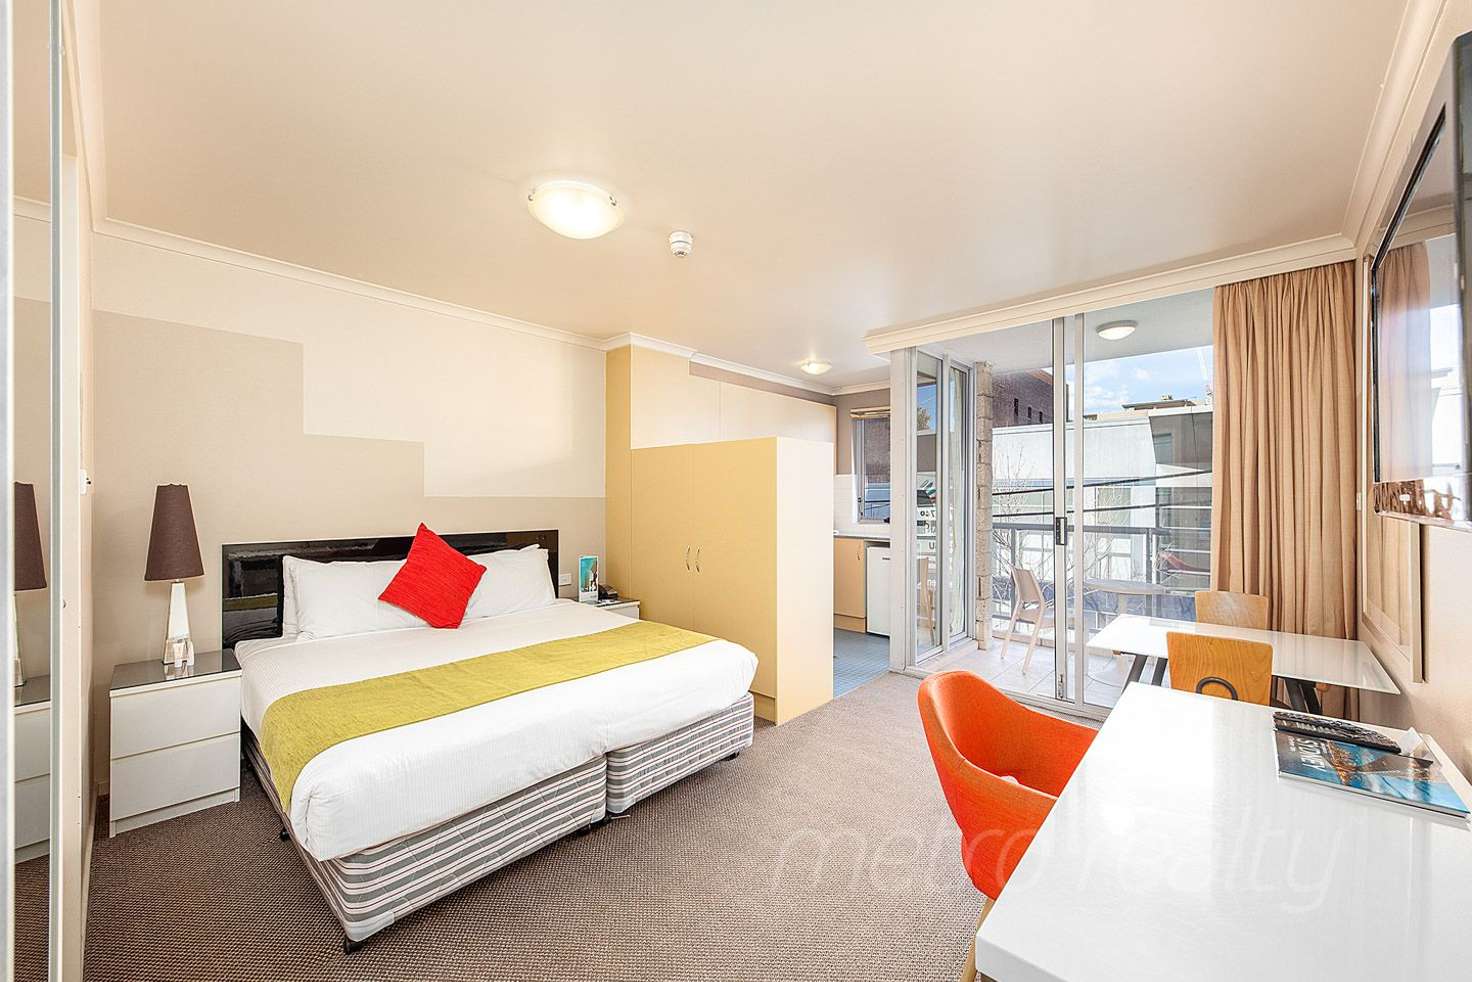 Main view of Homely apartment listing, 204/47-49 Chippen St, Chippendale NSW 2008